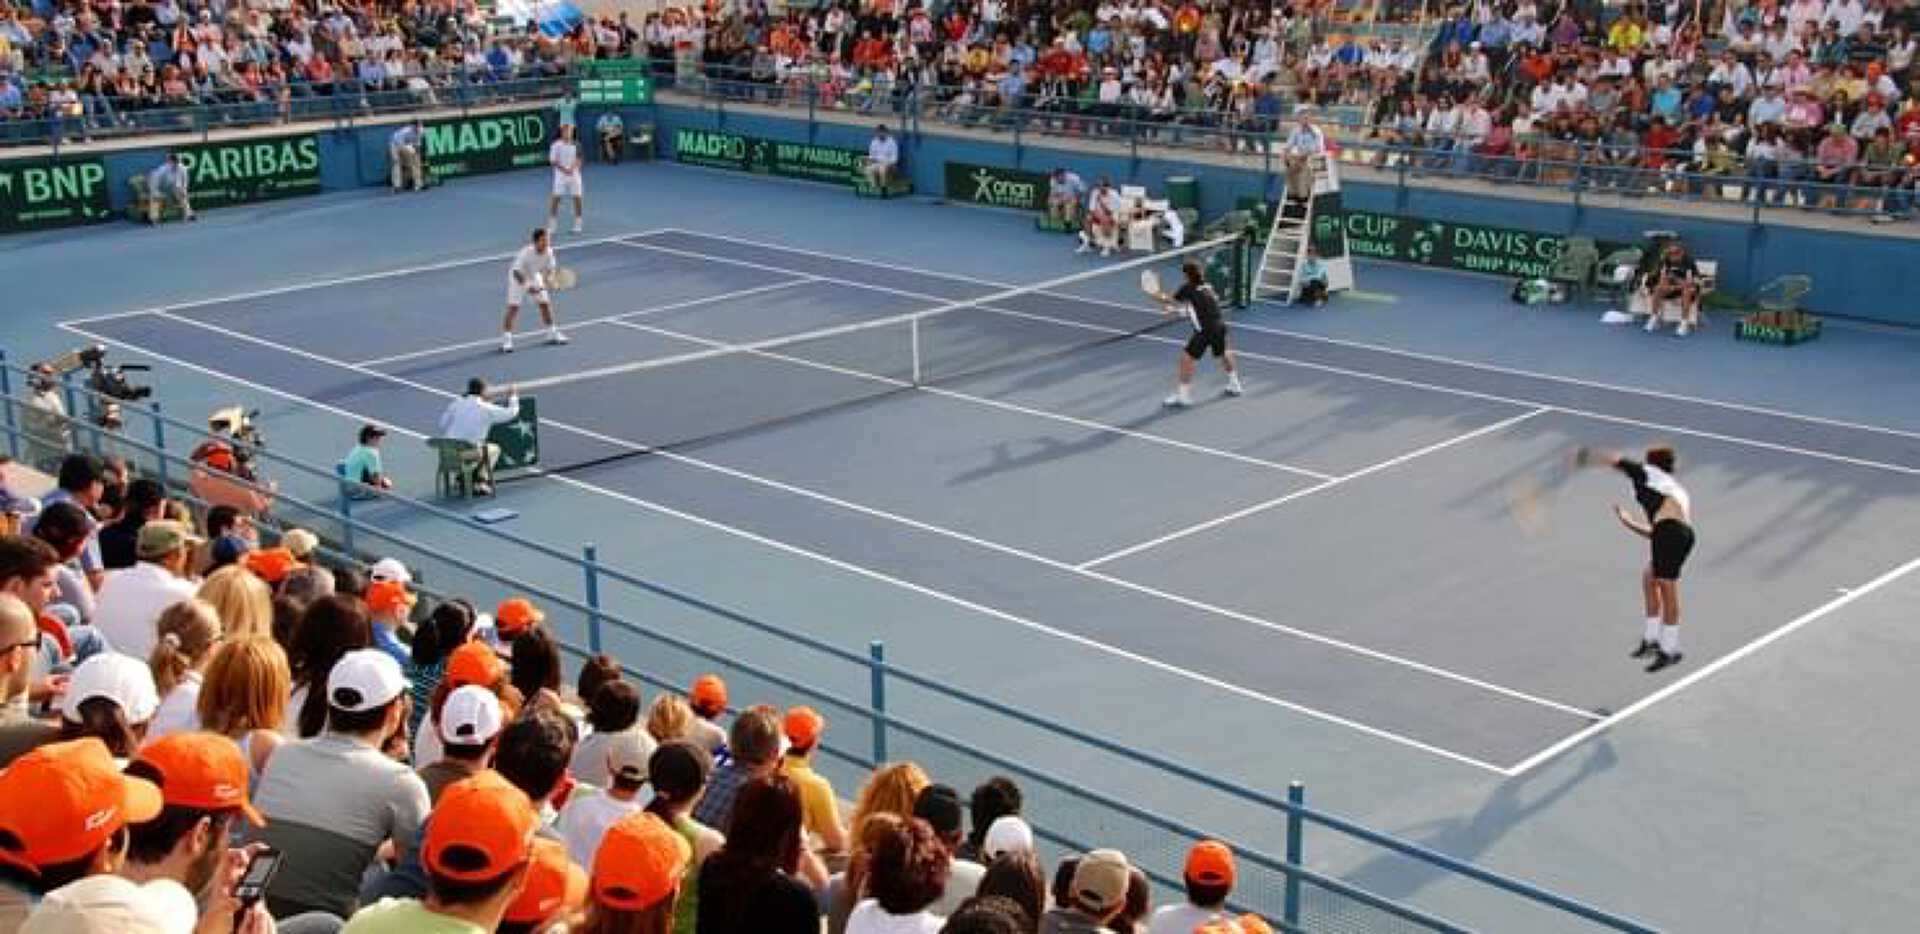 Doubles match at the Davis Cup with the blue tennis court and spectators wearing orange cups